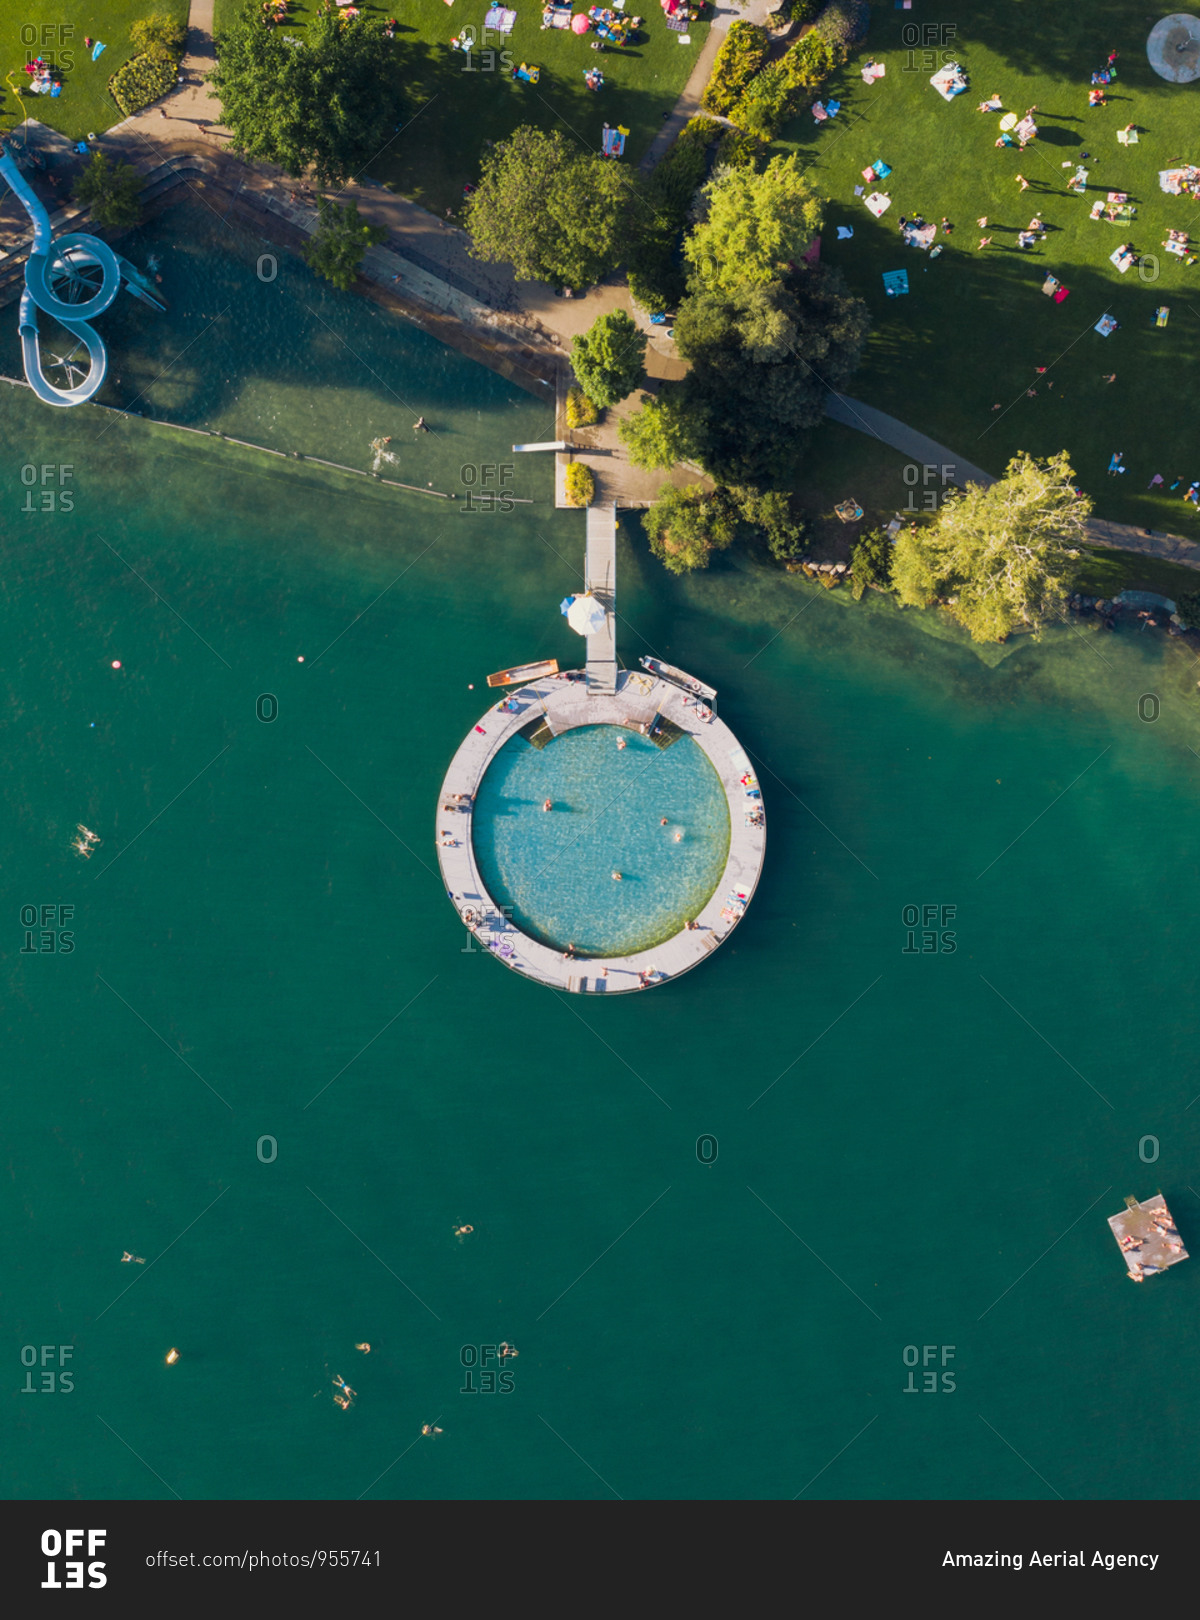 Aerial view of an outdoor public pool that looks like the search logo. a slide in the shape of the g of google and some swimmer in Zurich Switzerland